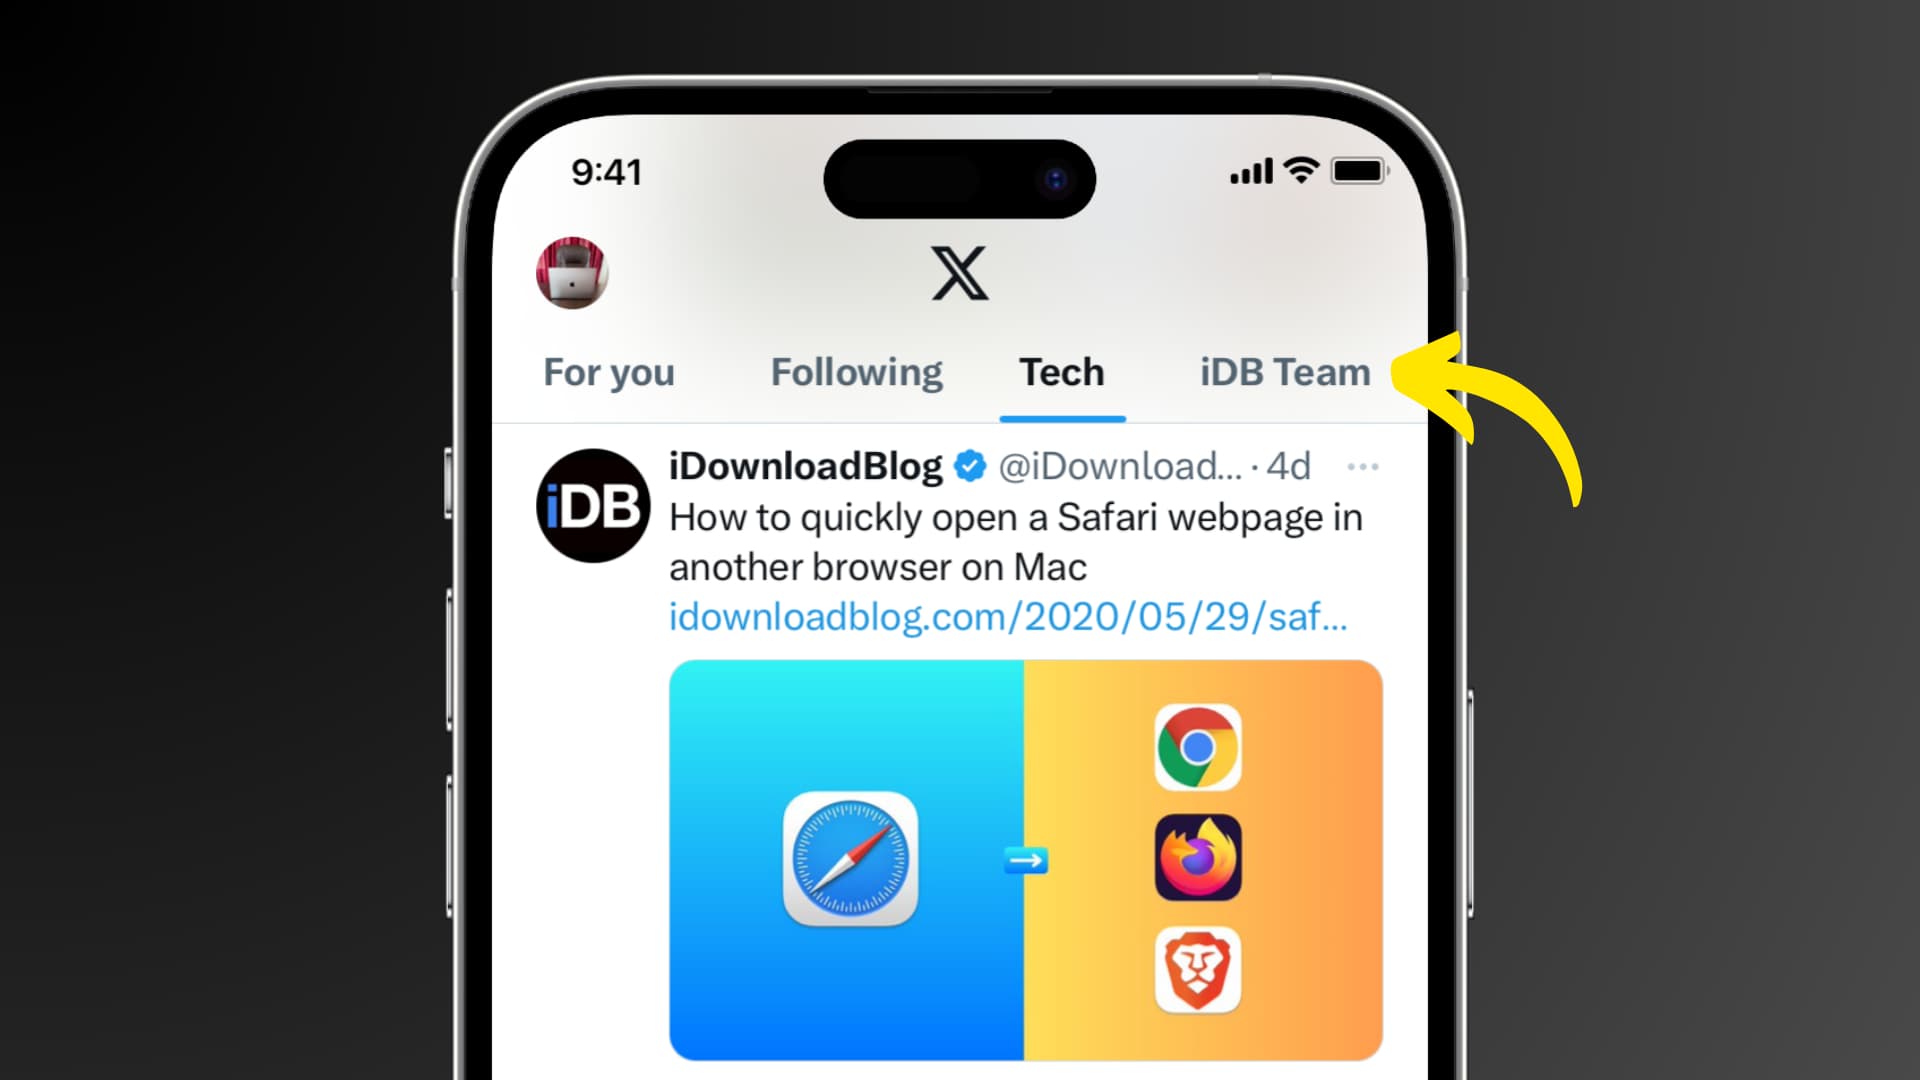 Twitter List pinned at the top of the X app on iPhone